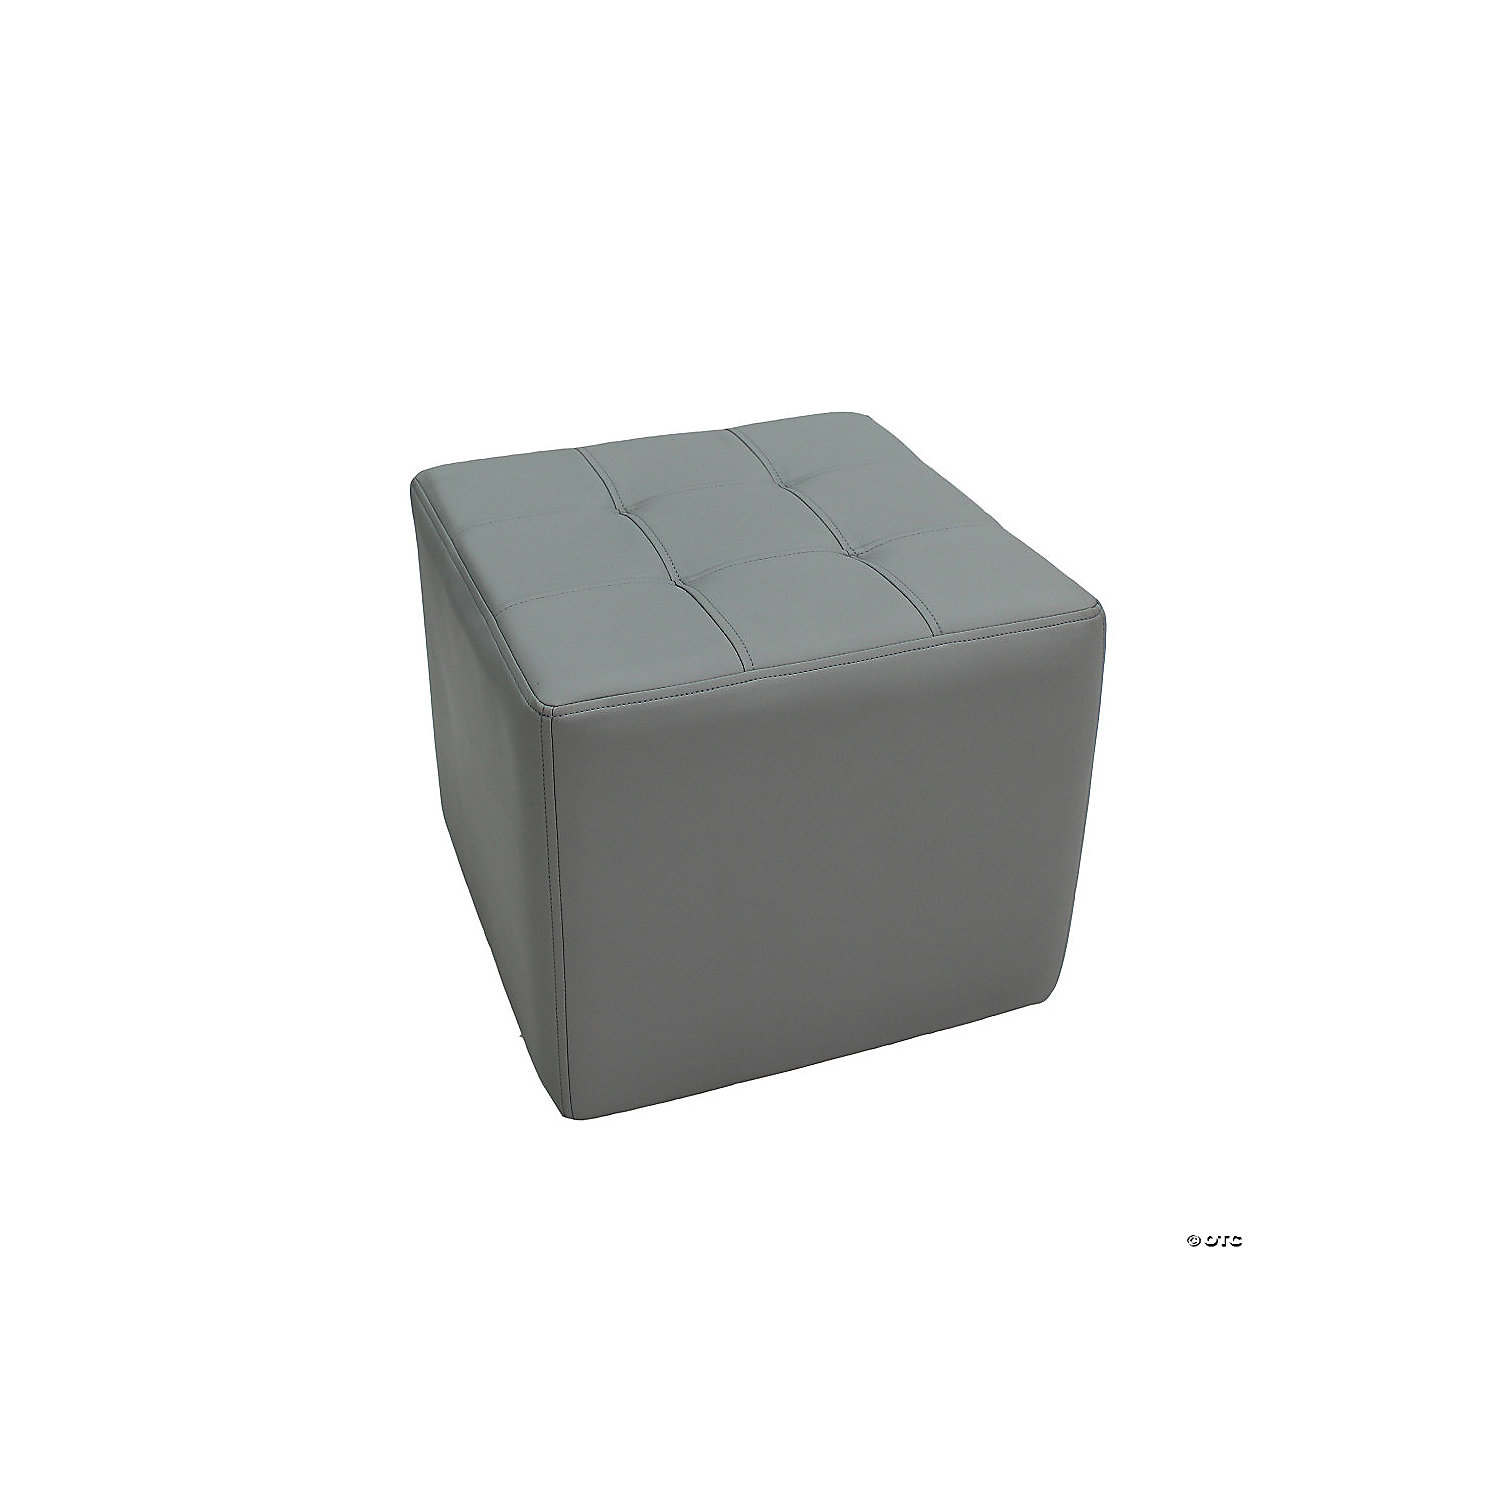 Factory Direct Partners Tufted Square Ottoman - Gray | Oriental Trading